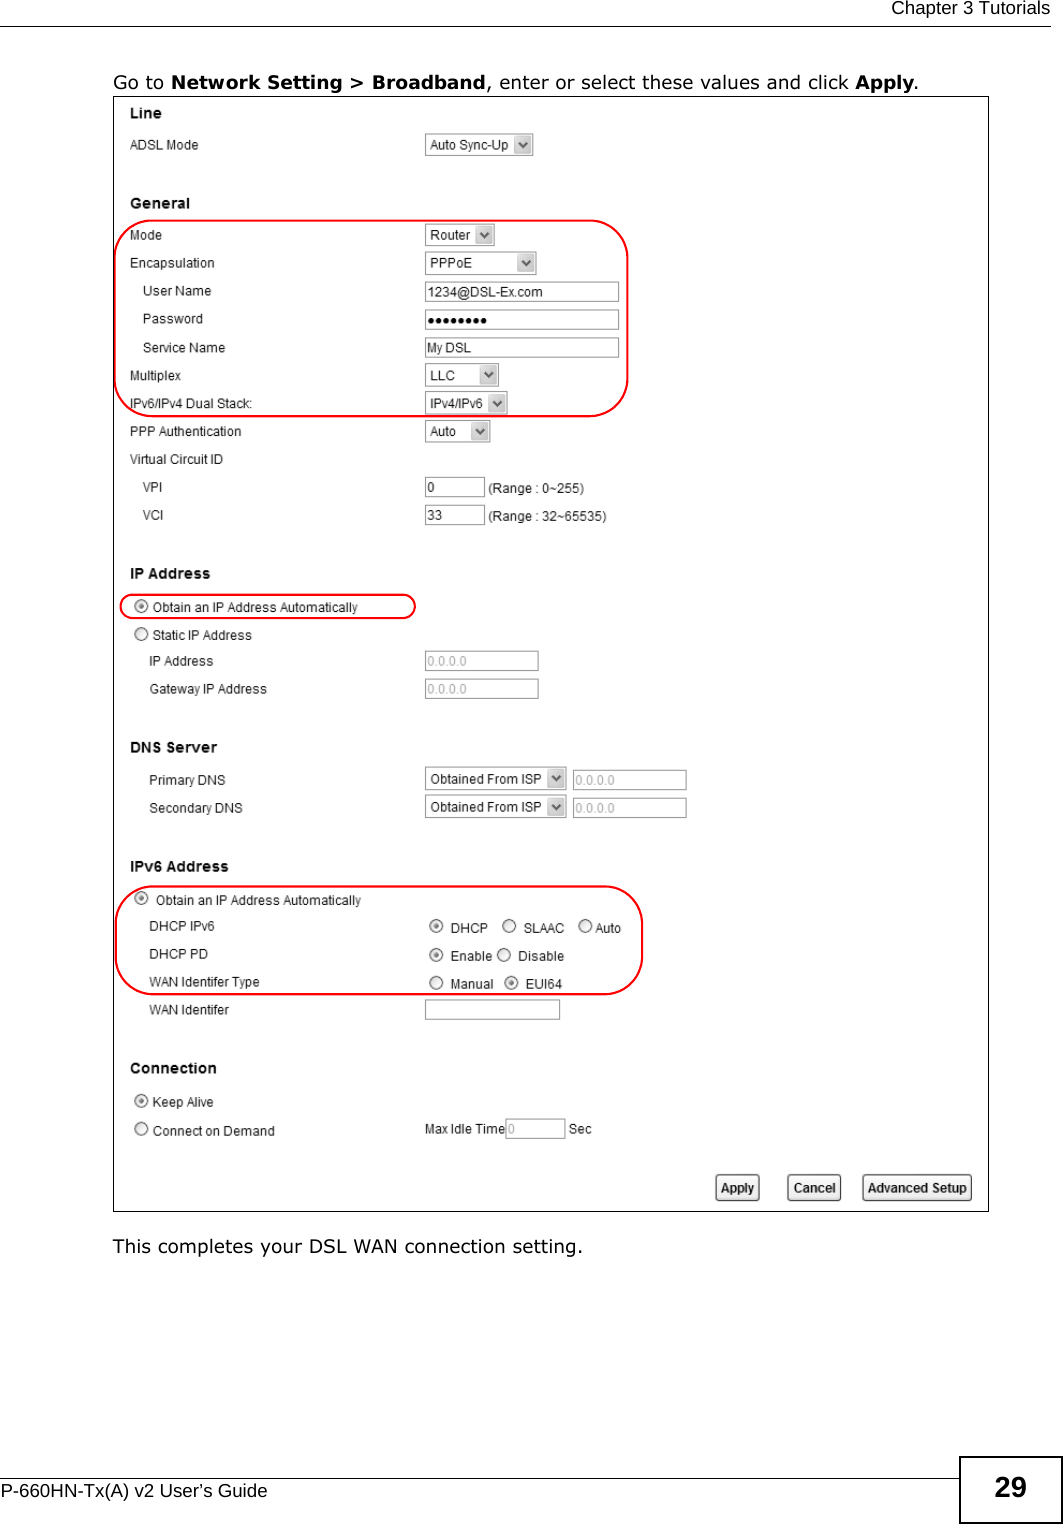  Chapter 3 TutorialsP-660HN-Tx(A) v2 User’s Guide 29Go to Network Setting &gt; Broadband, enter or select these values and click Apply.This completes your DSL WAN connection setting. 